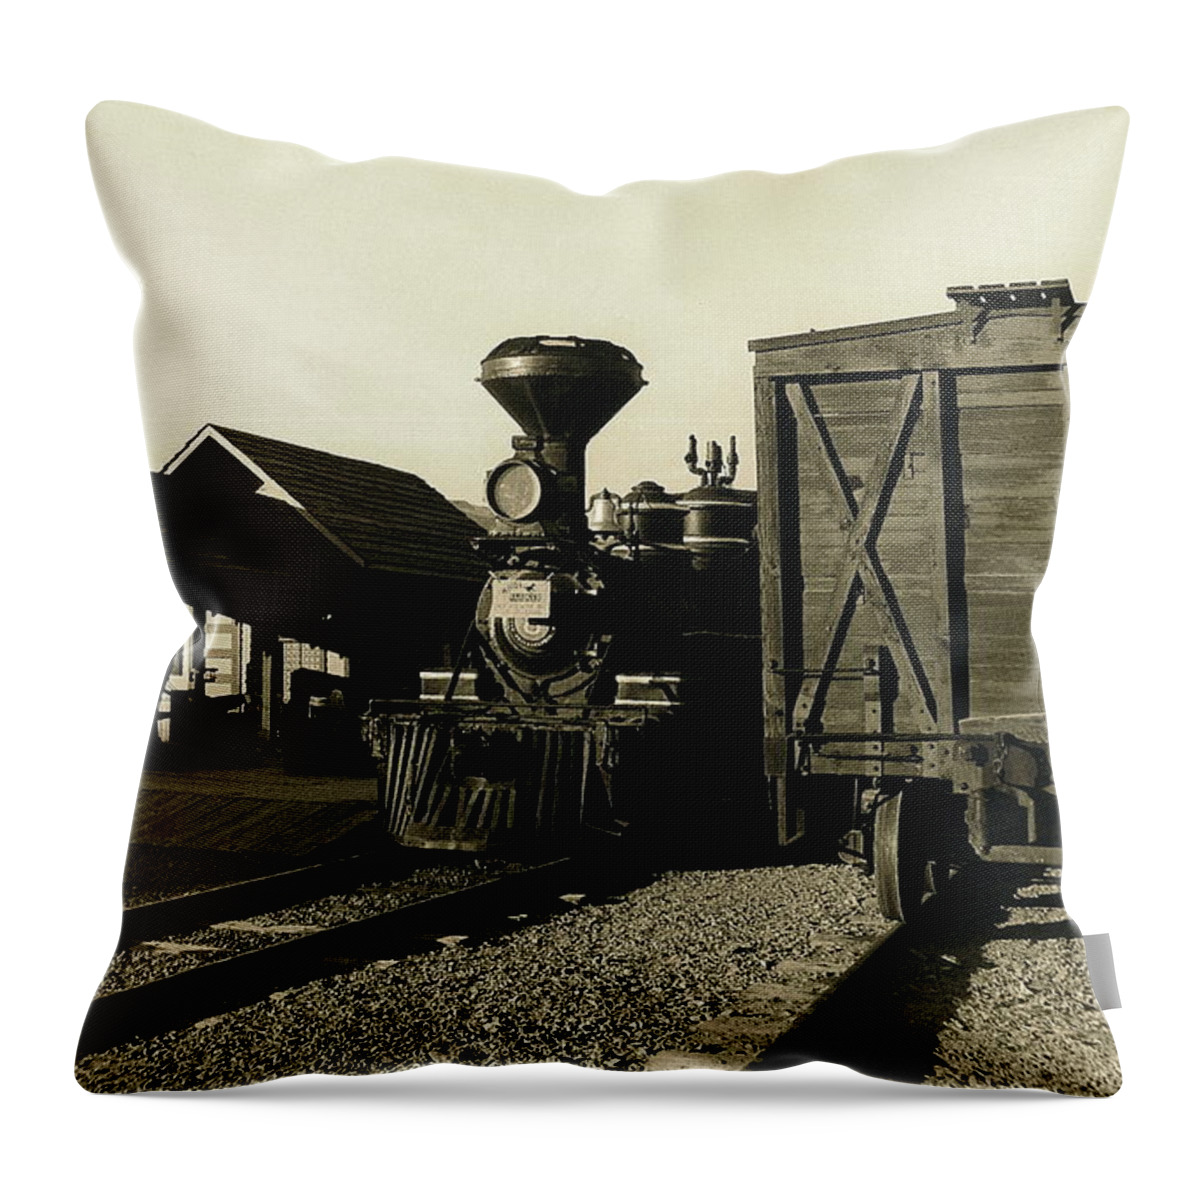 Reno Rr Engine And Station Old Tucson Arizona 1984 Throw Pillow featuring the photograph Reno RR engine and station Old Tucson Arizona 1984 by David Lee Guss